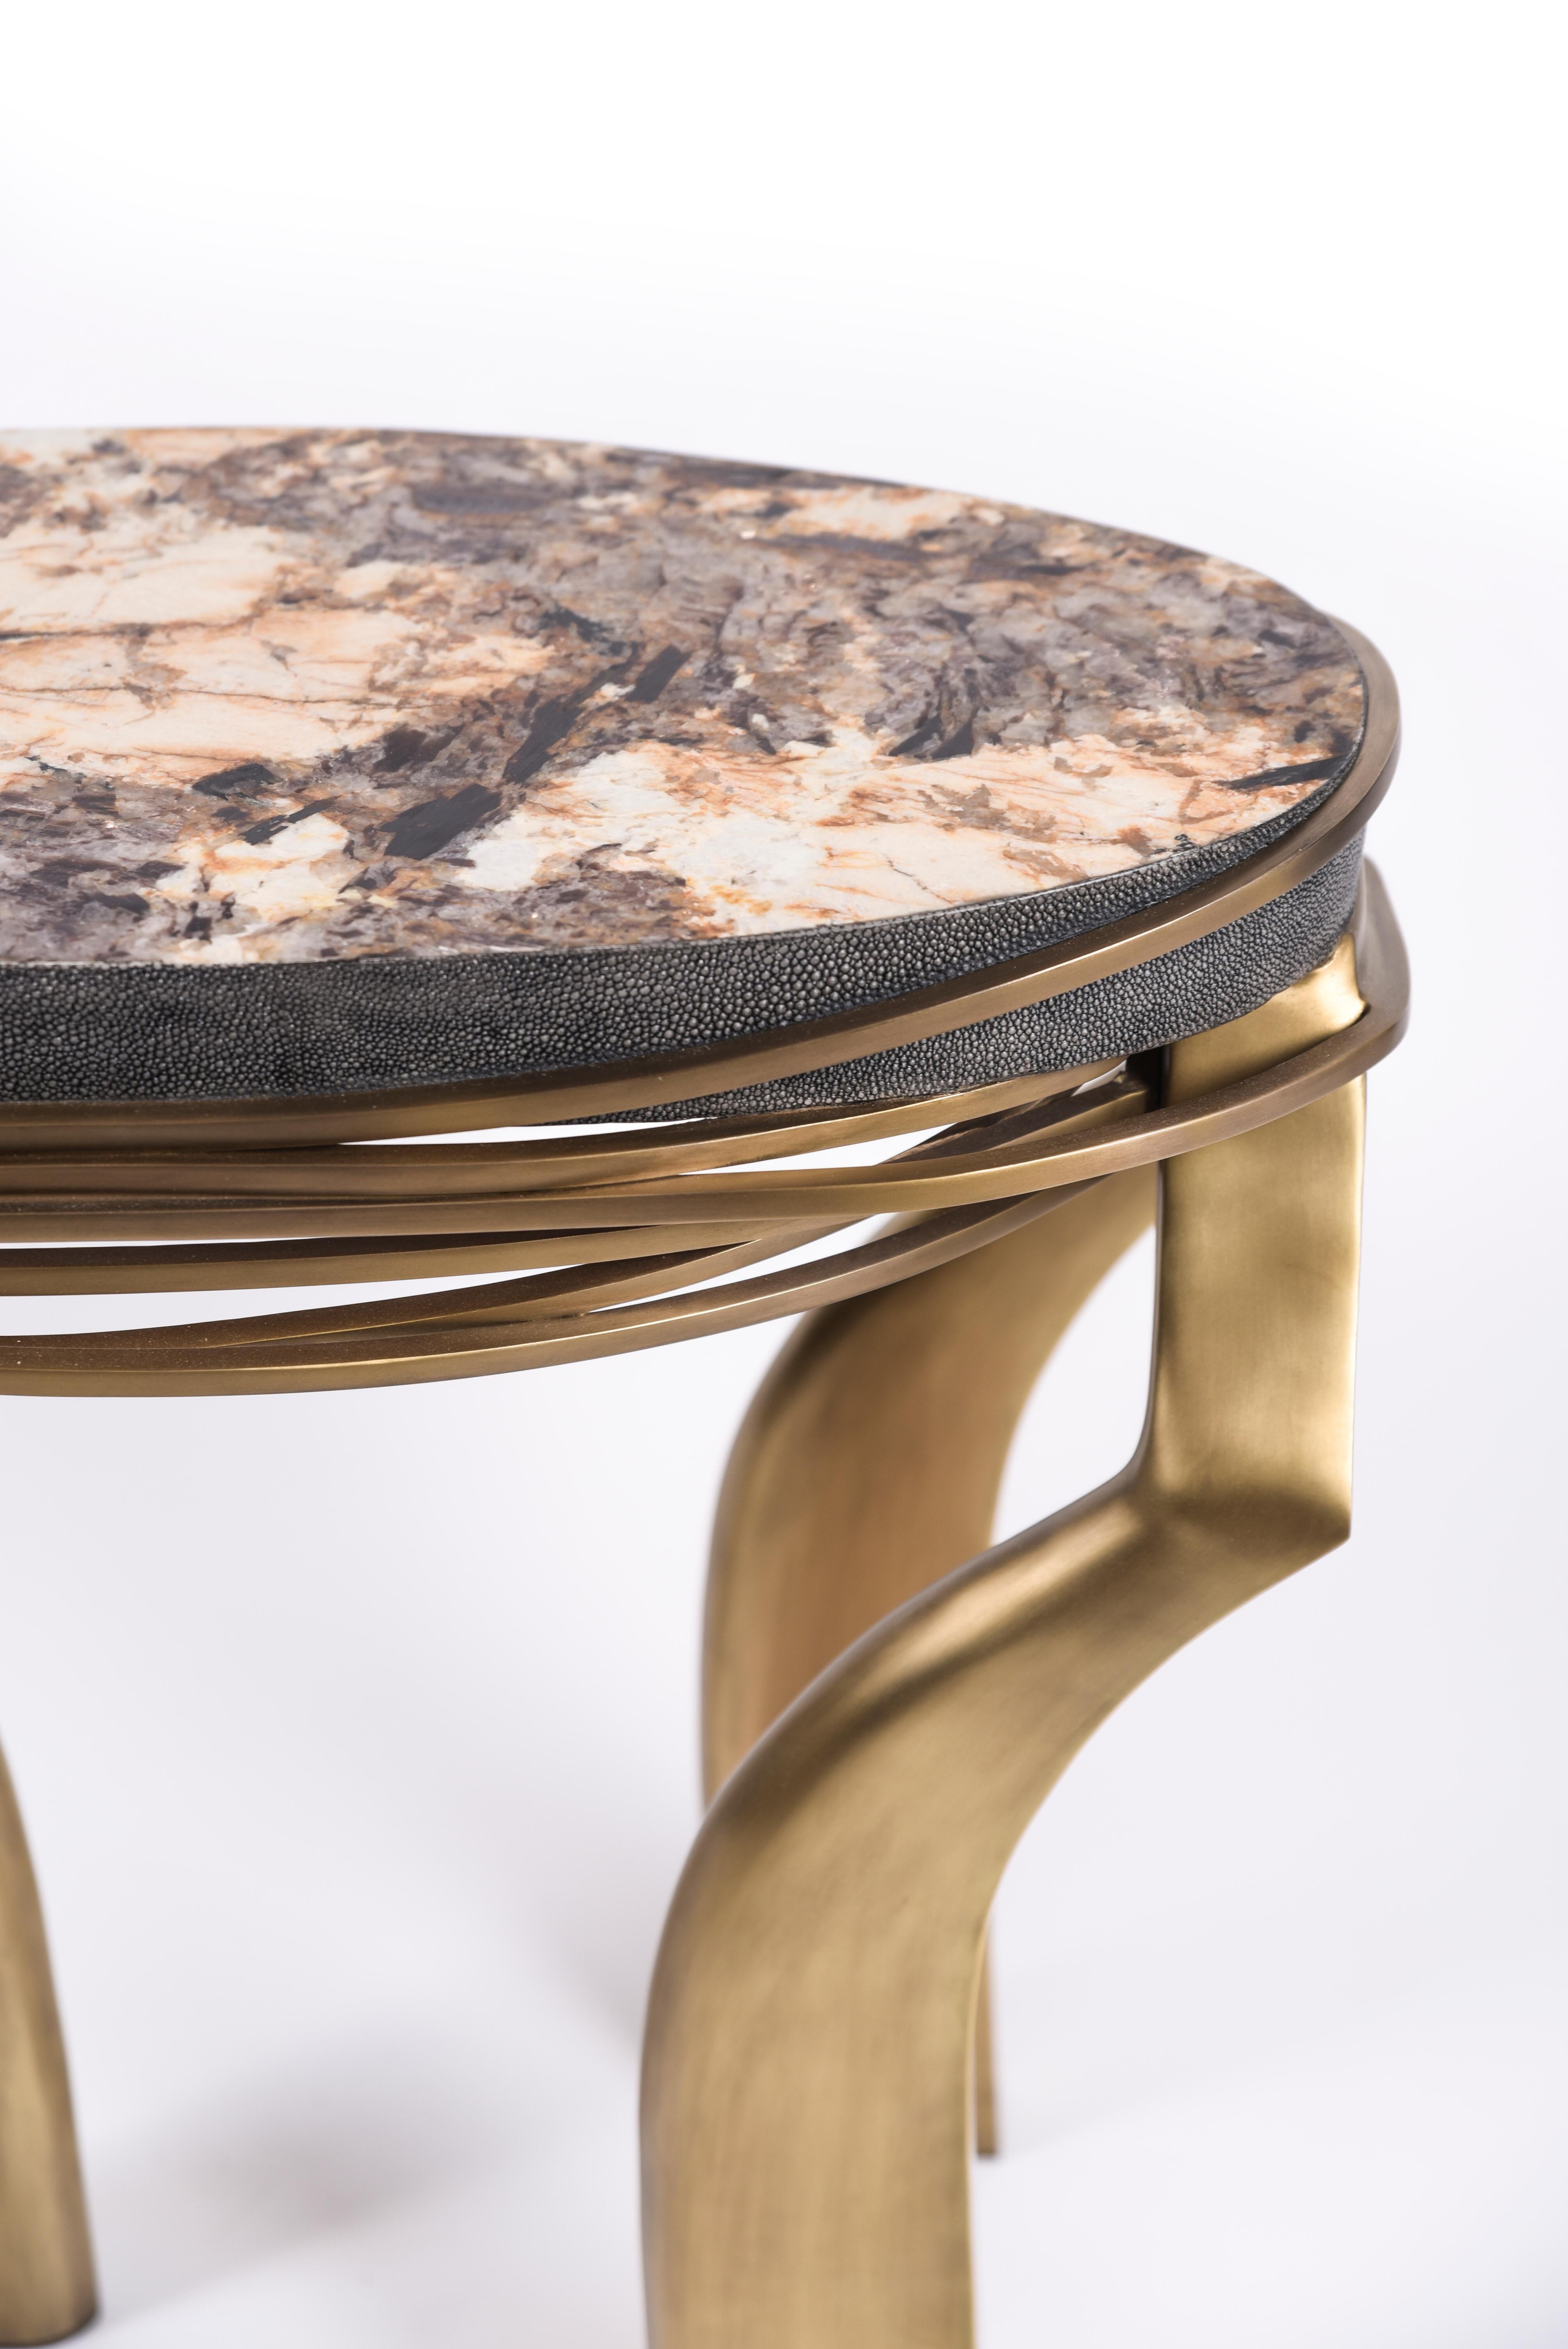 Galaxy Side Table Large in Hwana, Shagreen and Brass by Kifu, Paris In New Condition For Sale In New York, NY